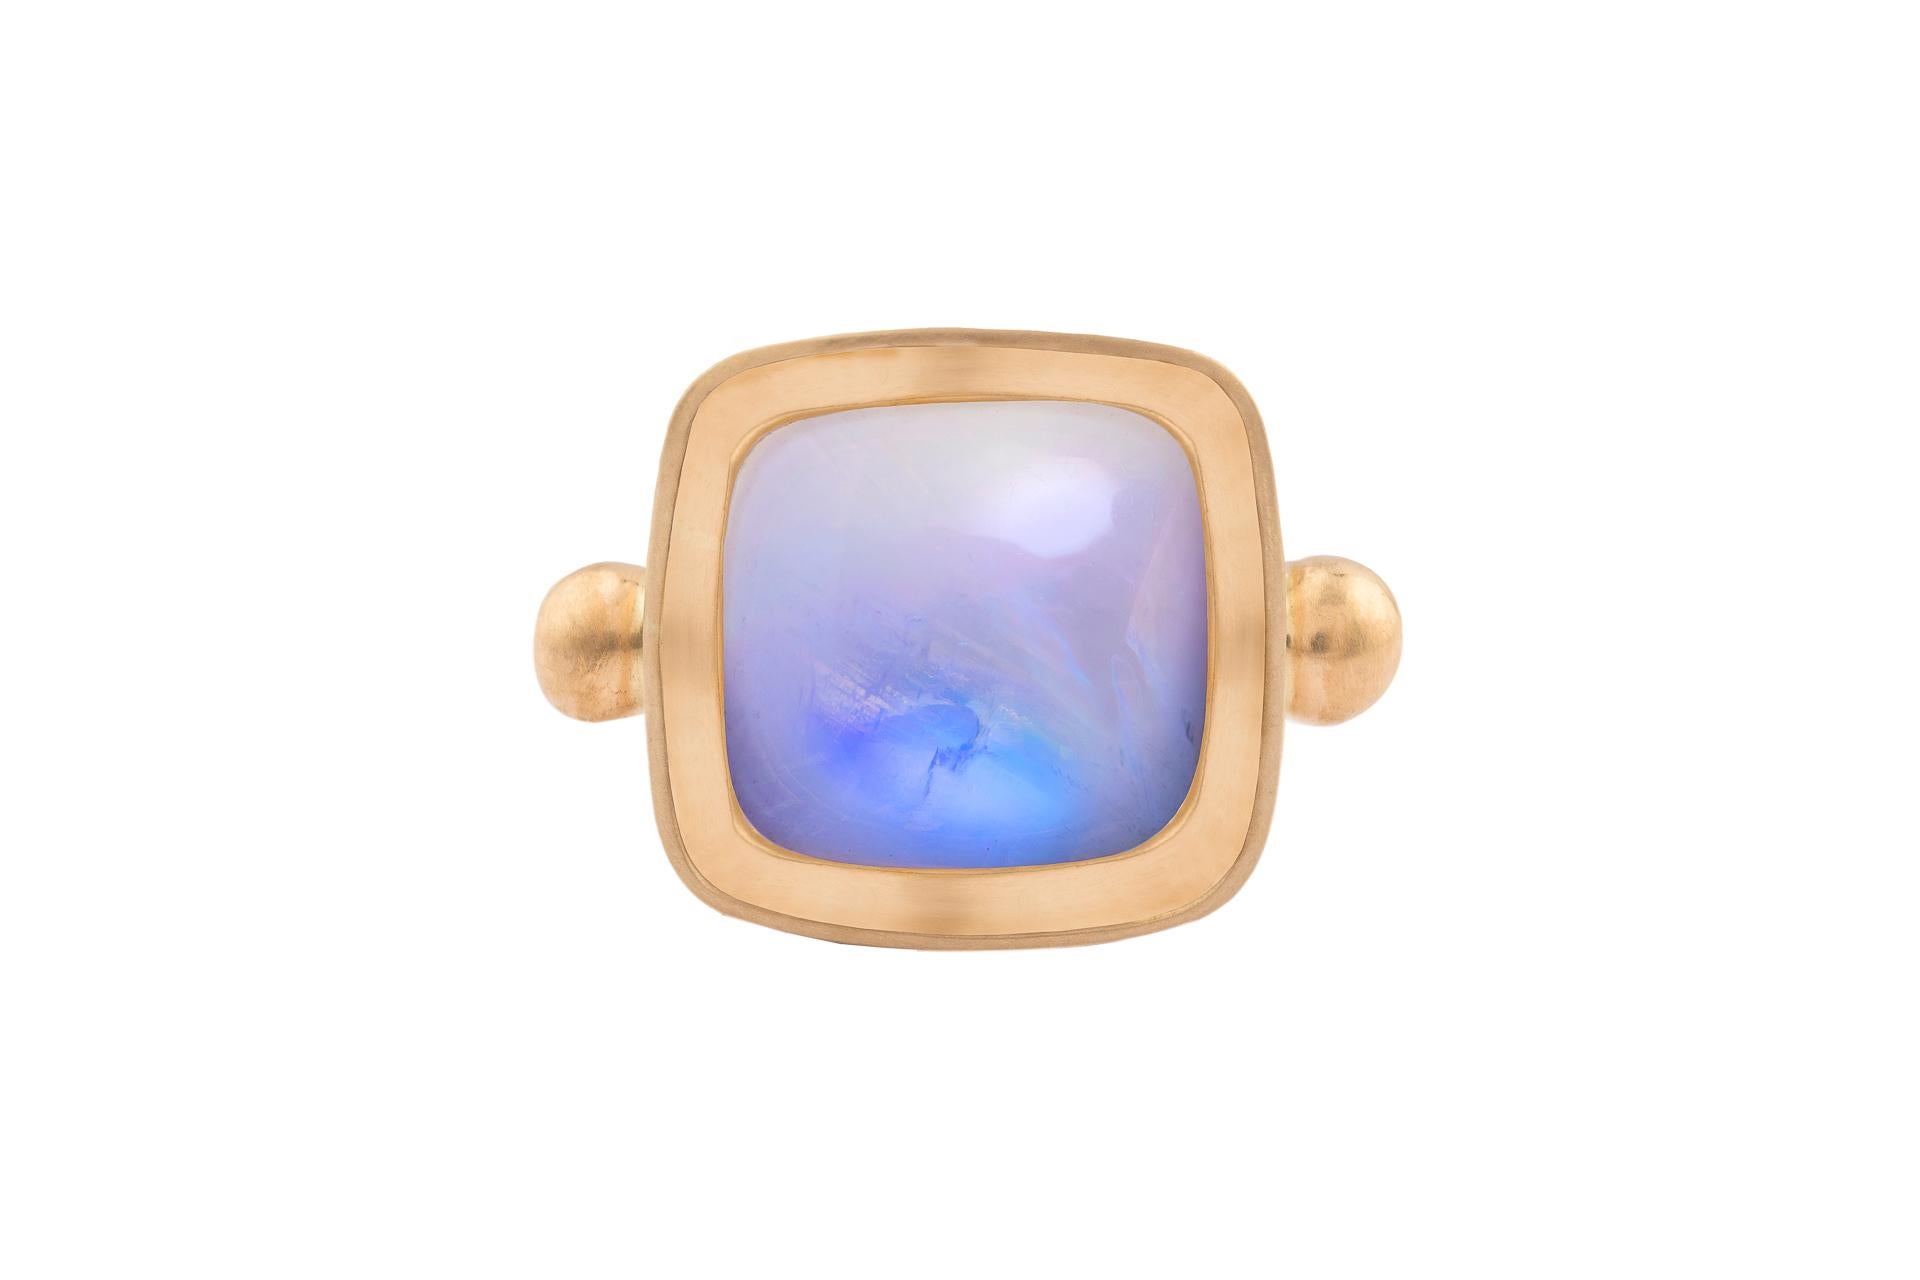 OUROBOROS square cabochon rainbow moonstone set in 18kt gold ring.

This ring comes in various different sizes so please contact the designer.

OUROBOROS’ commitment to using only the most unique stones set in 18 or 24 Karat gold, is matched only to